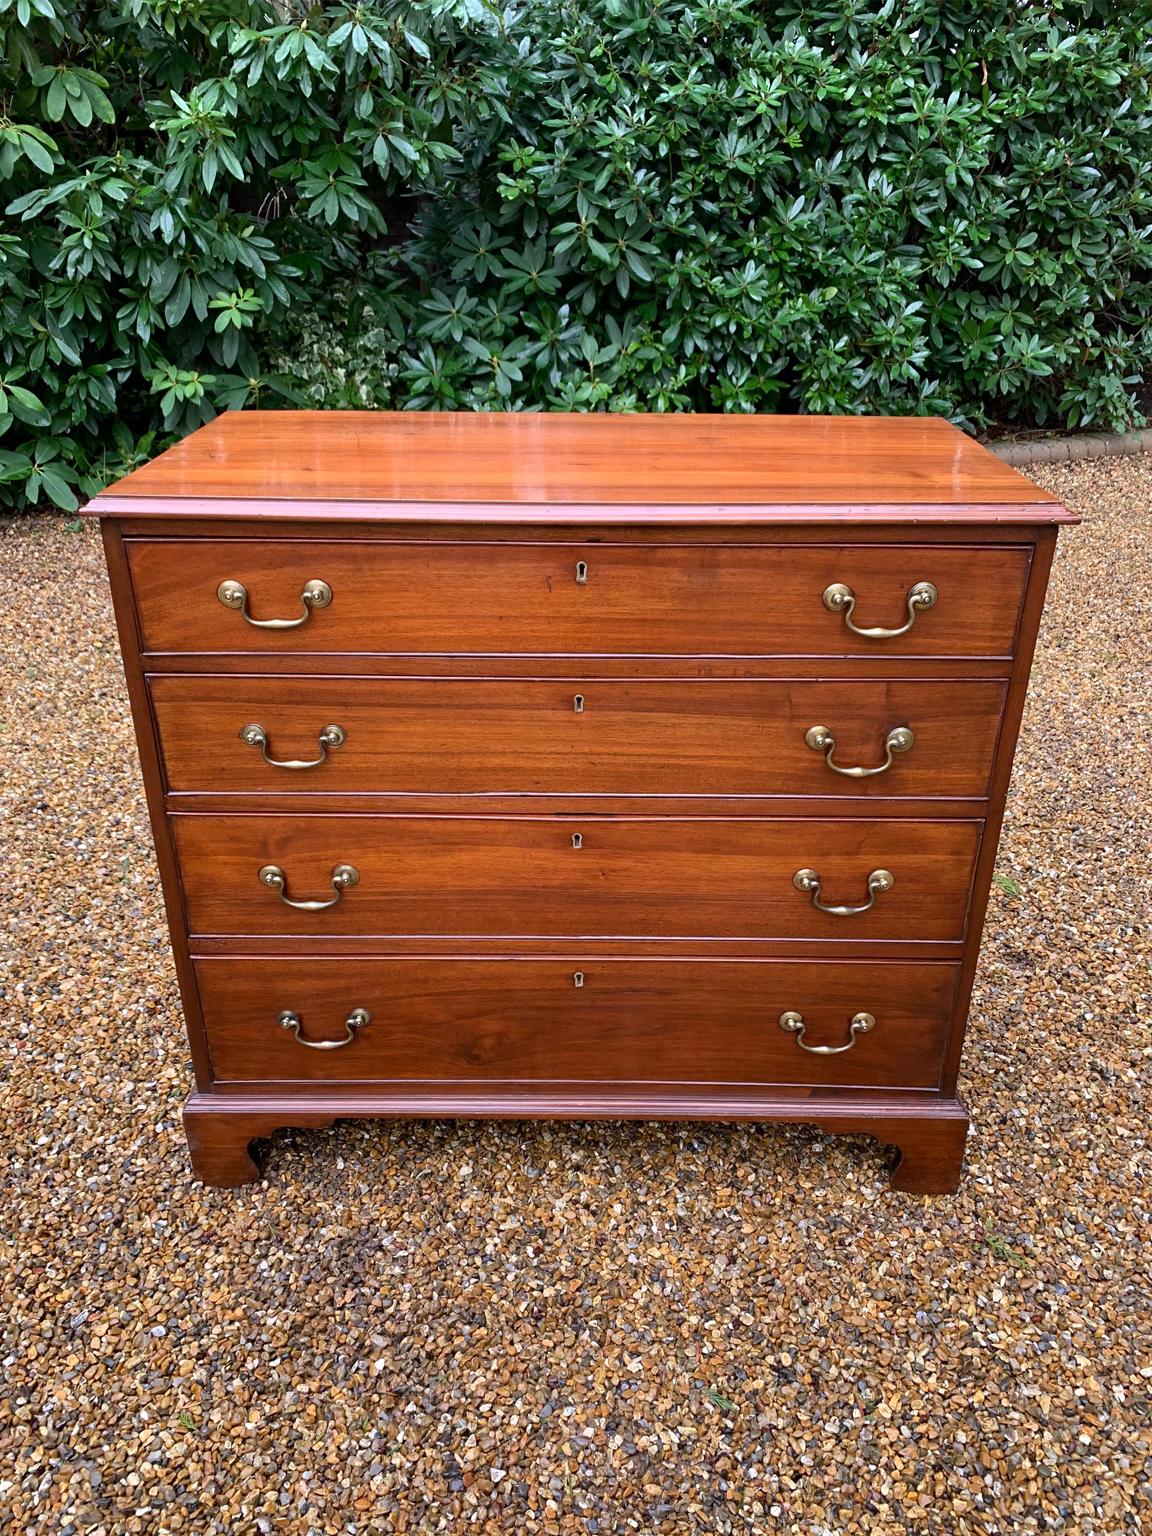 19th century Georgian Mahogany chest of drawers with four long graduated drawers and brass swan neck handles, on bracket feet.